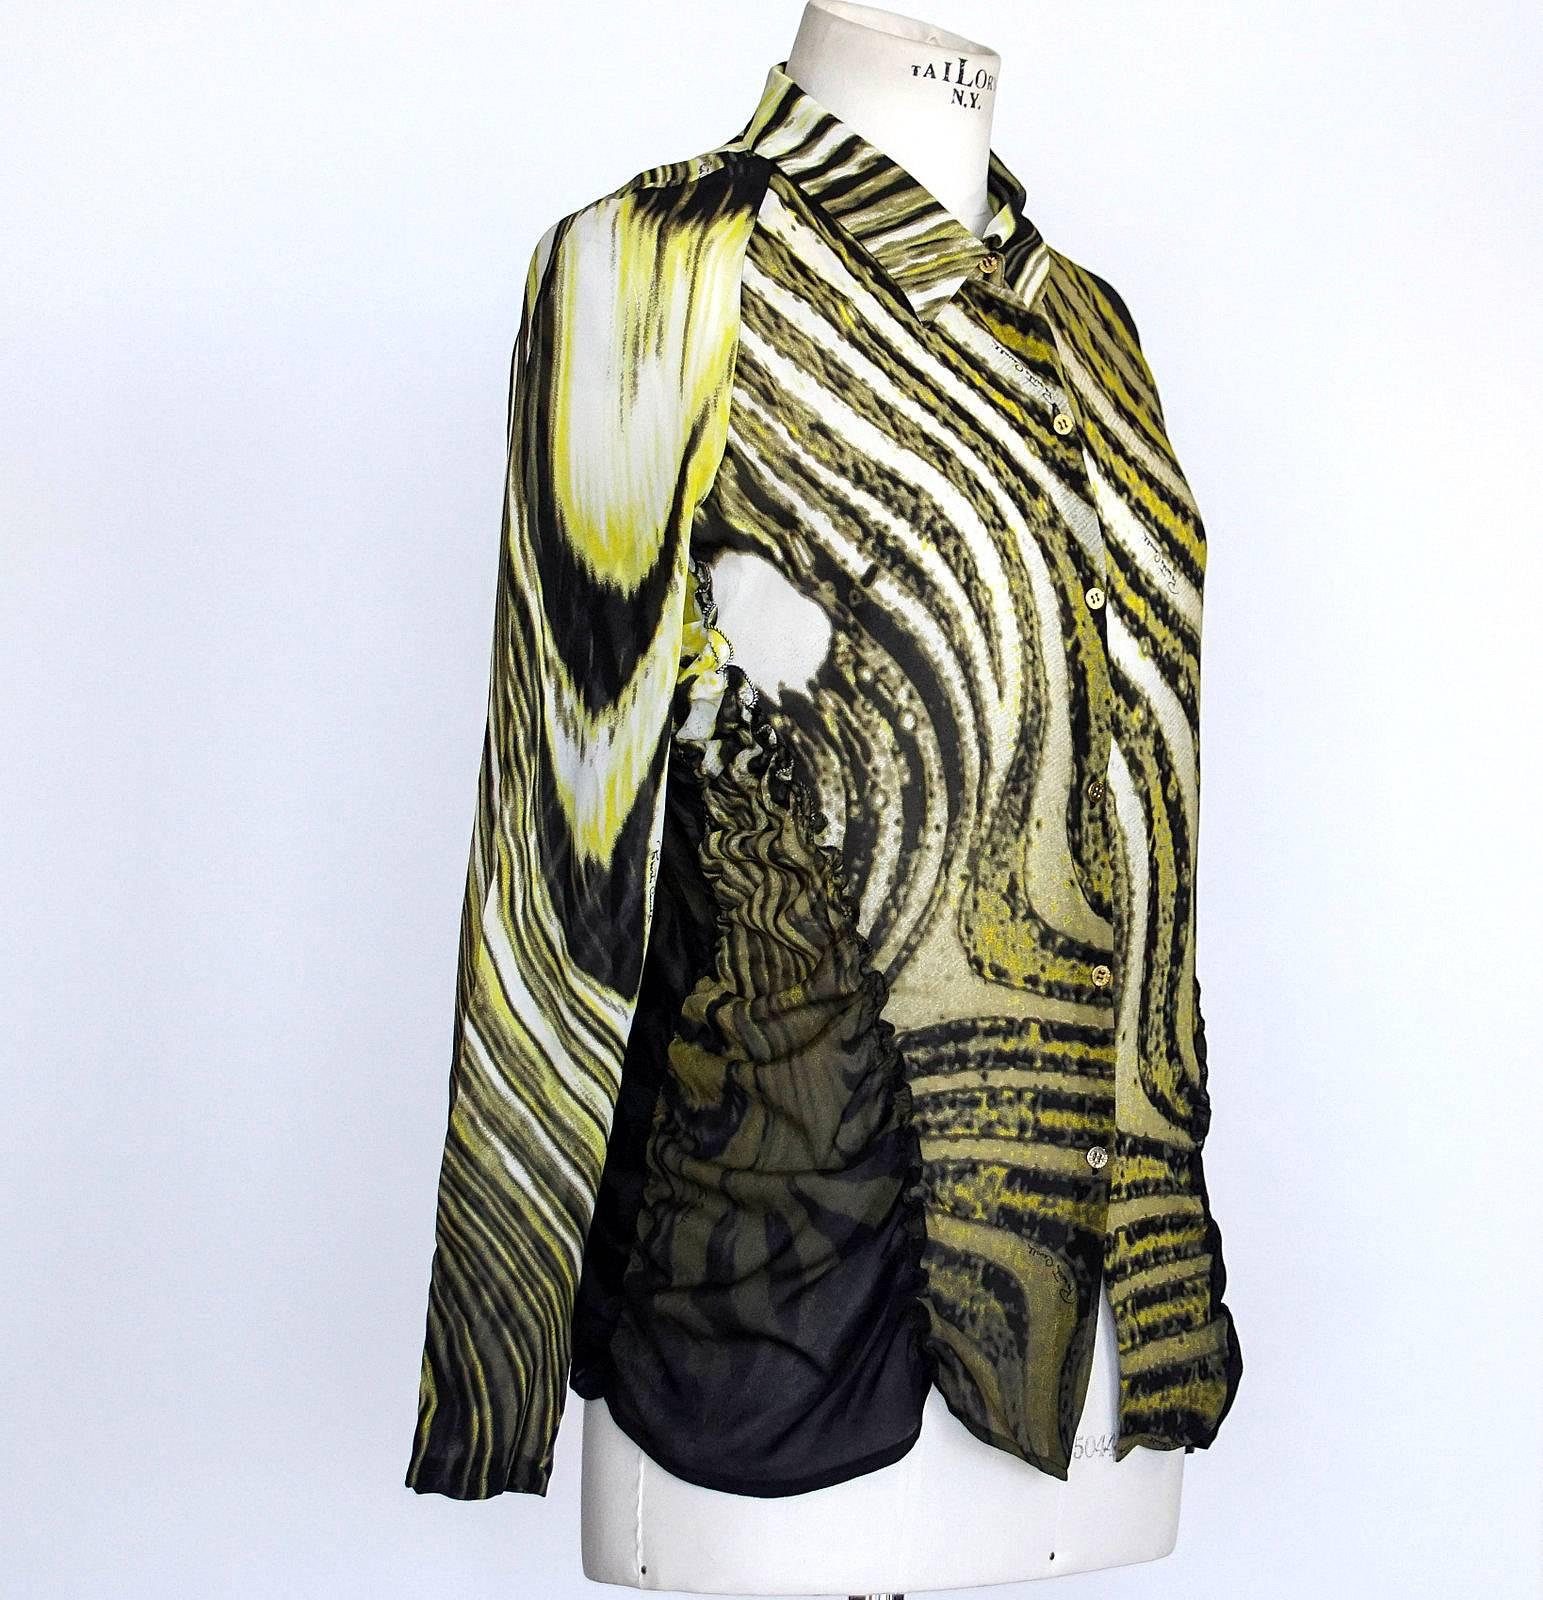 Guaranteed authentic Roberto Cavalli  top in a timeless abstract print. 
Print is a beautiful lemony yellow fading into winter white and black.
6 gold embossed buttons.
Left sleeve is black, right is print.
The sides are shirred and edged with a